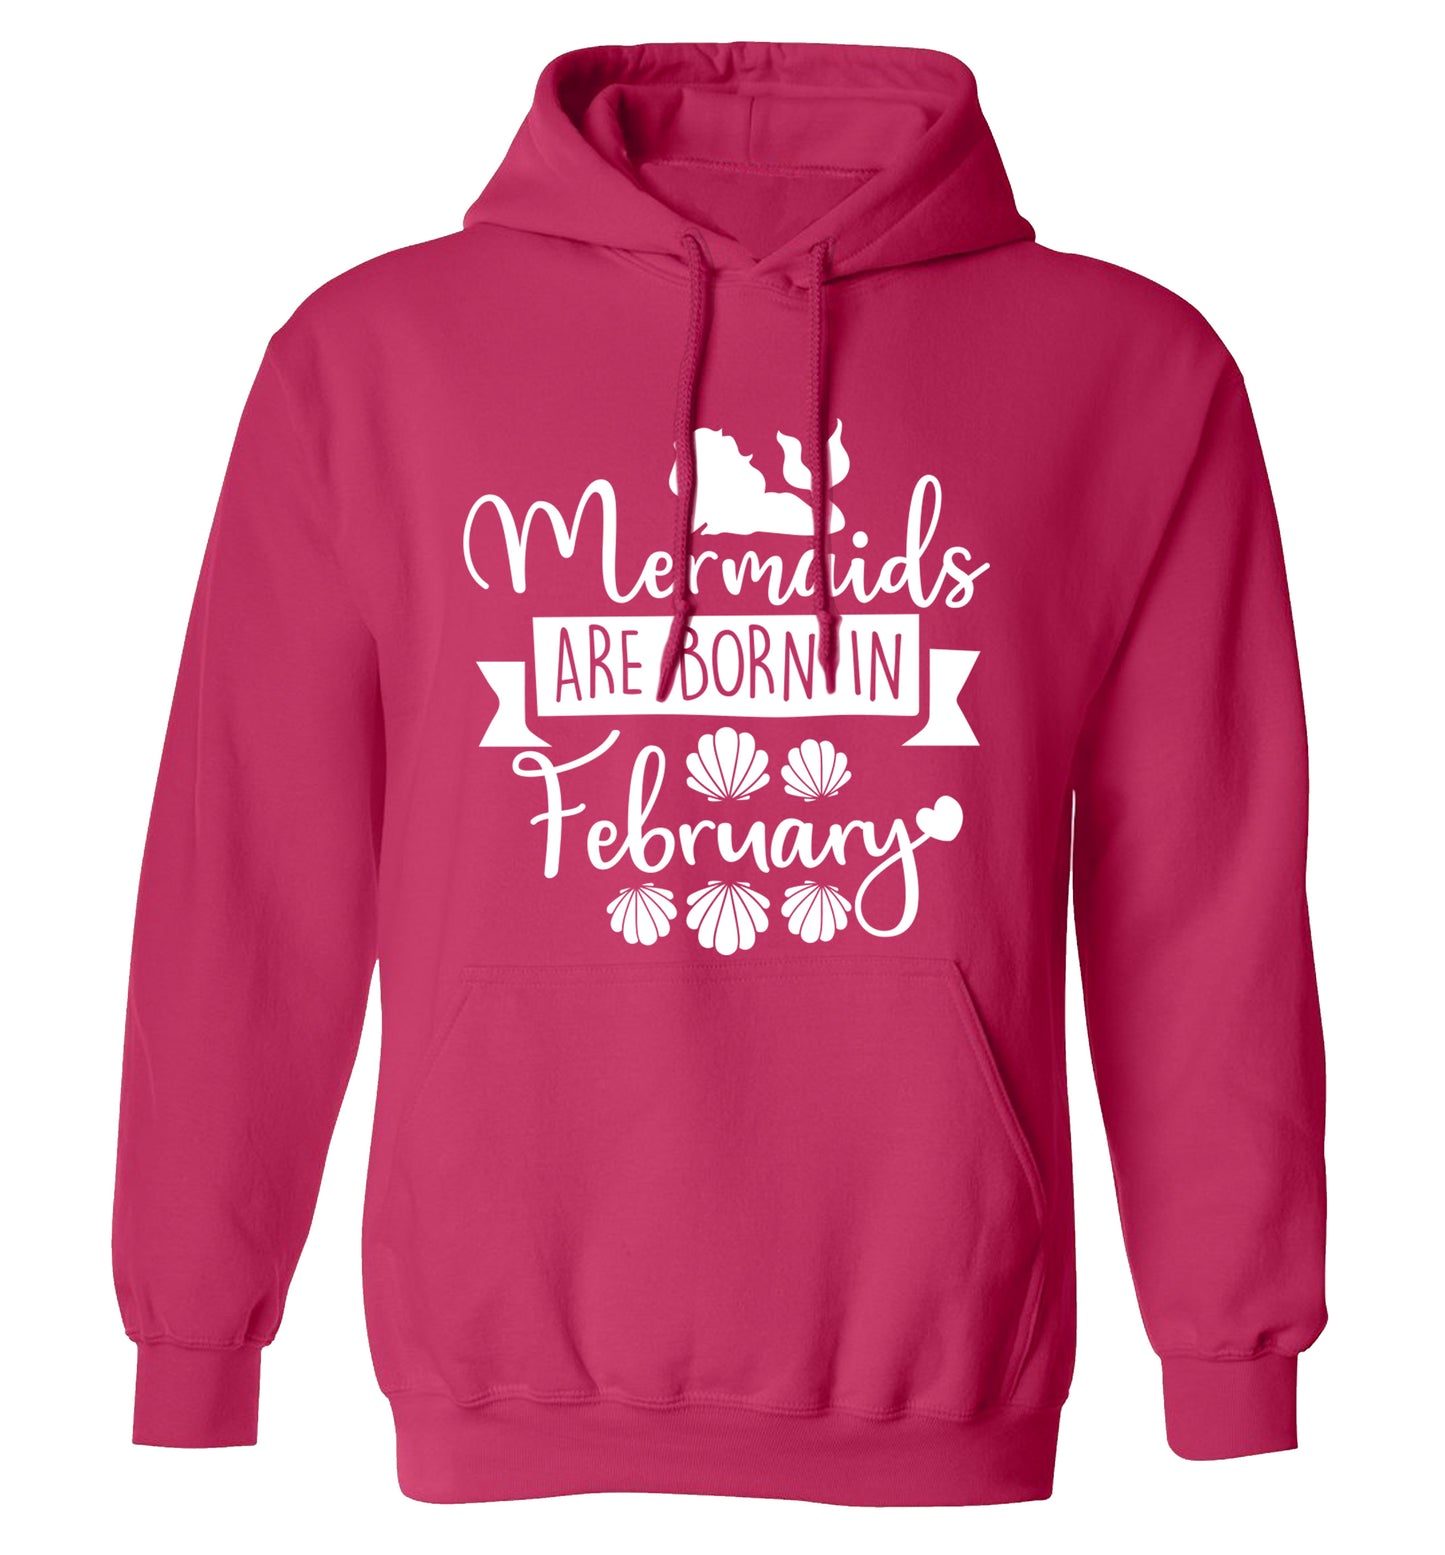 Mermaids are born in February adults unisex pink hoodie 2XL